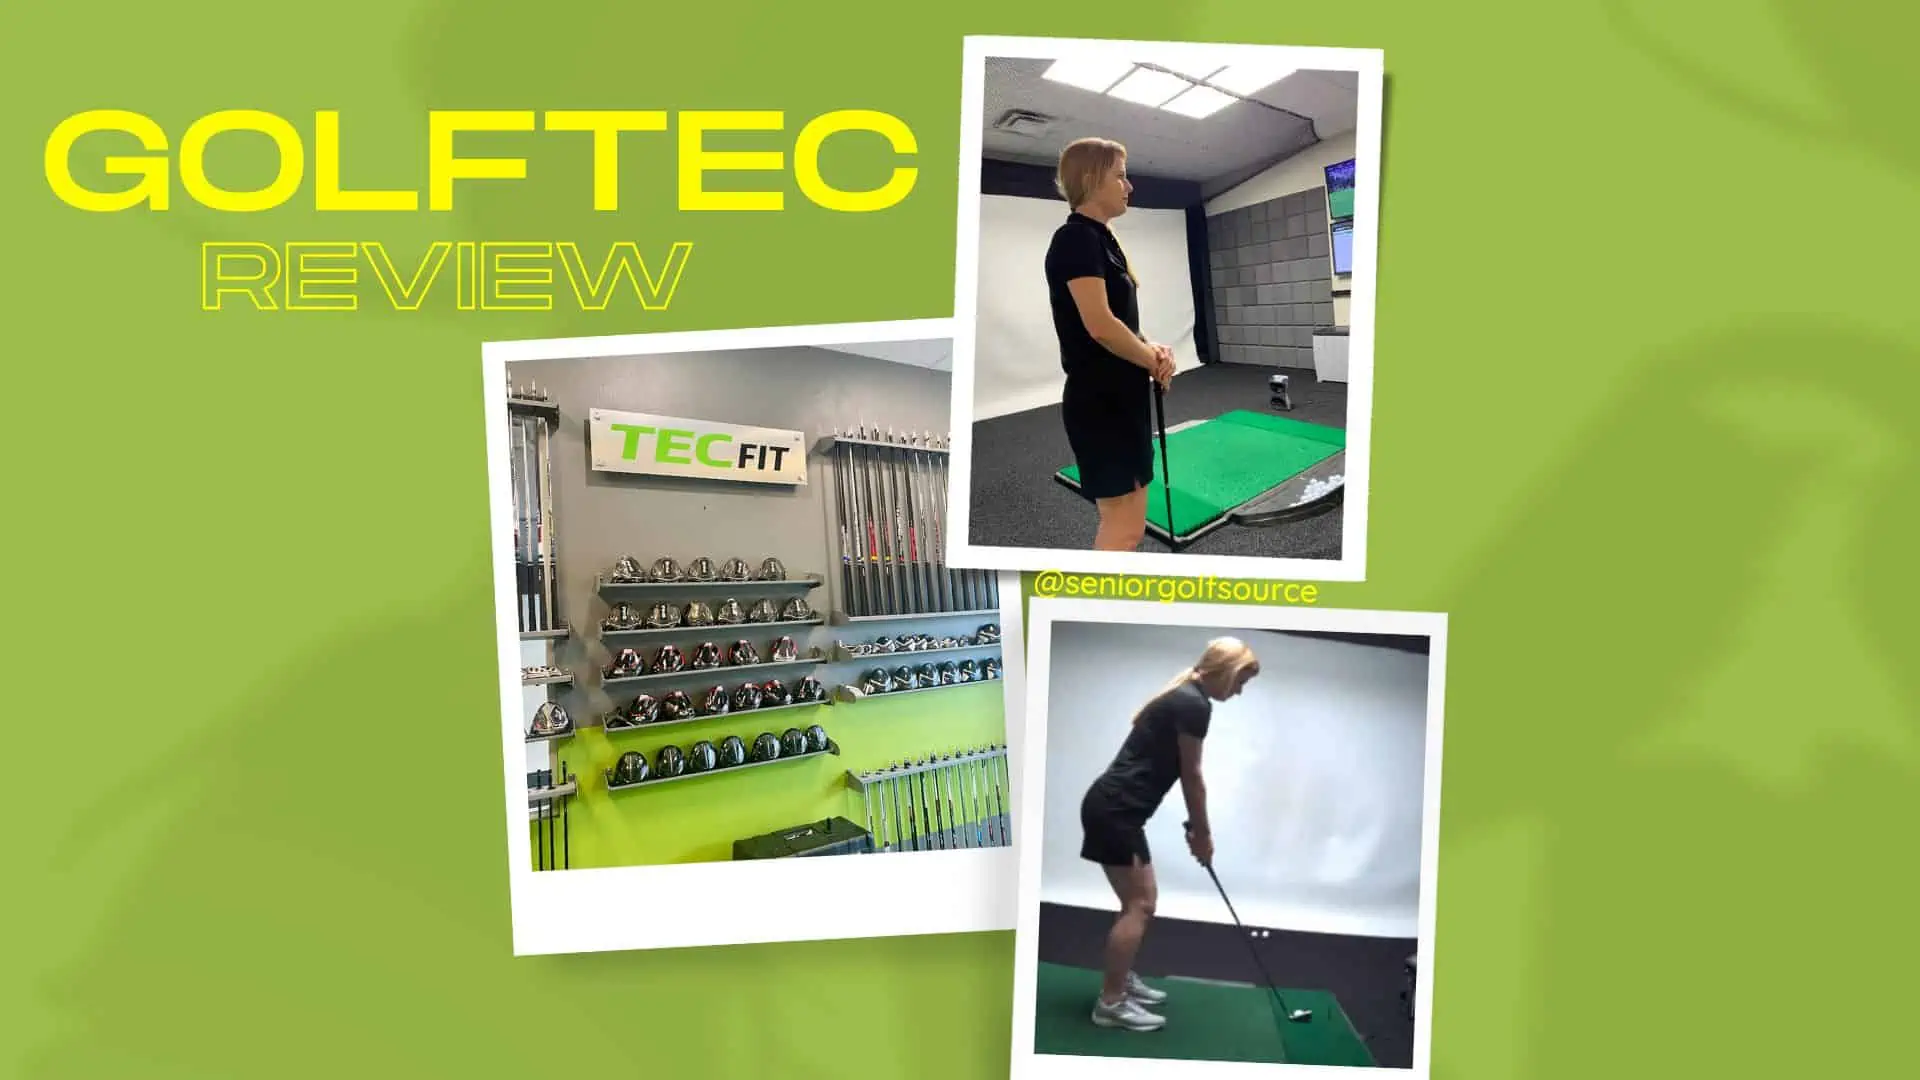 Golftec review collage of Golftec Sarasota location